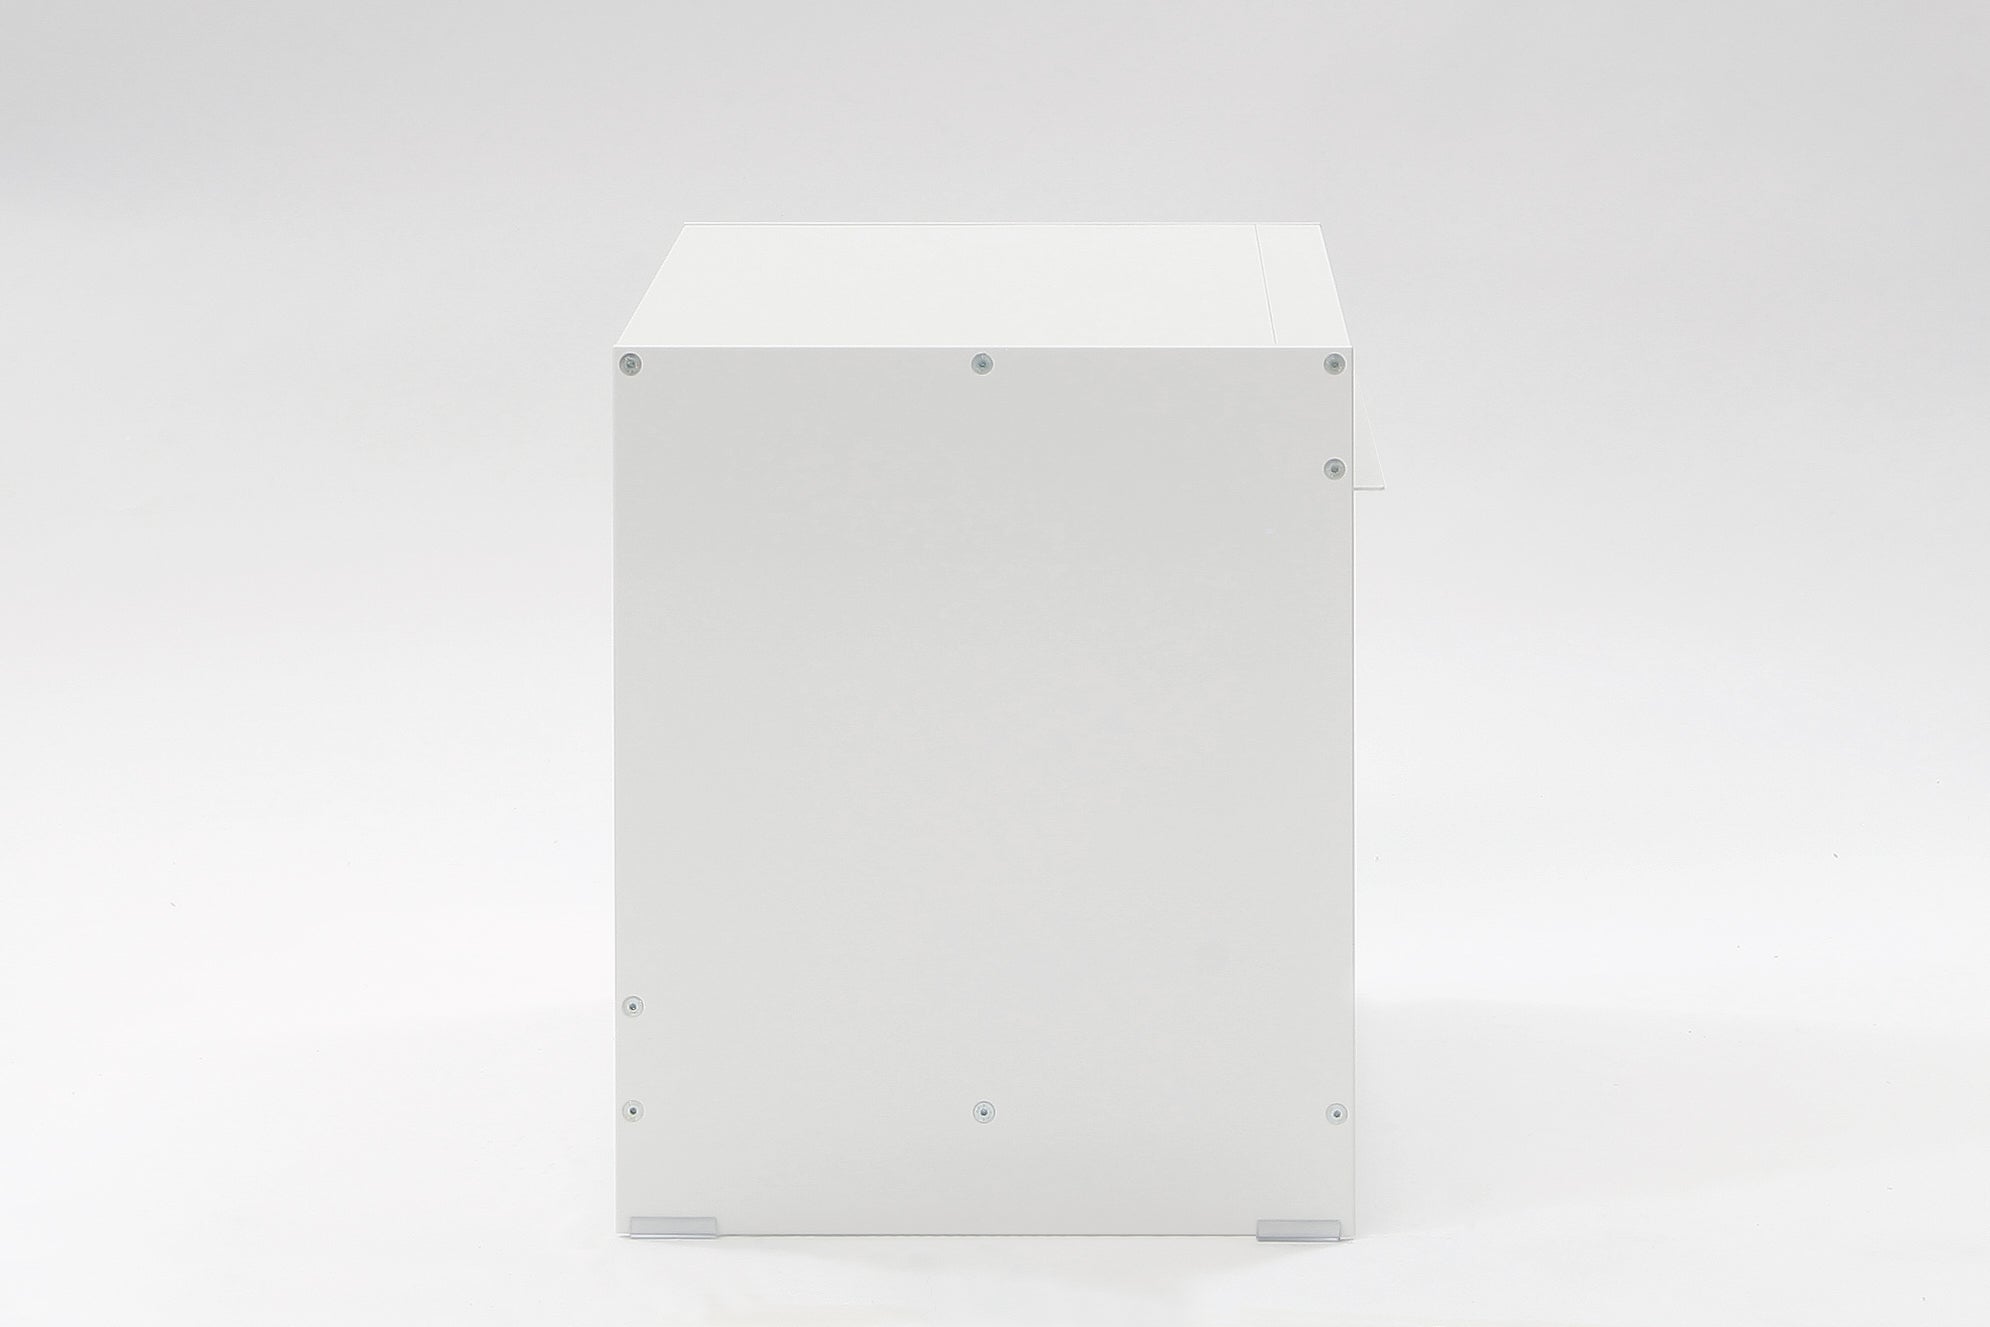 H1 aluminium side table, side view in white by ON&ON